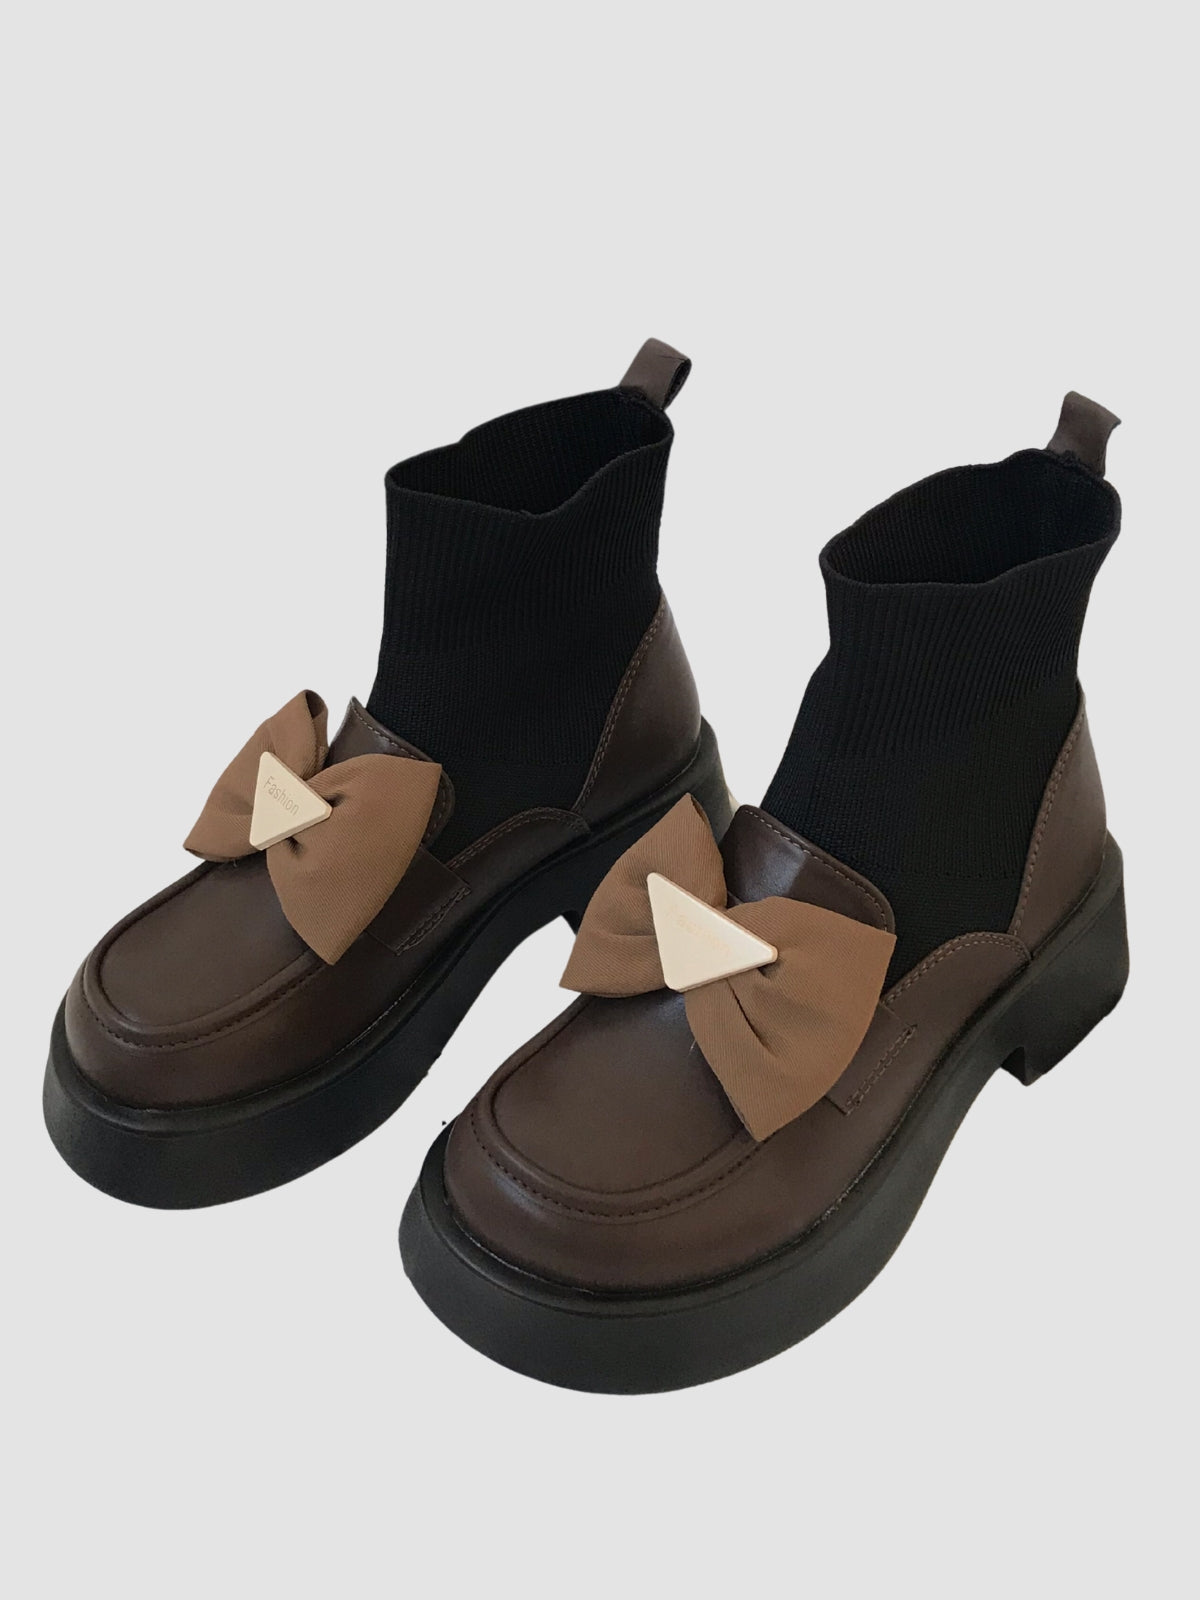 WLS Thick Soled Thin Retro Boots